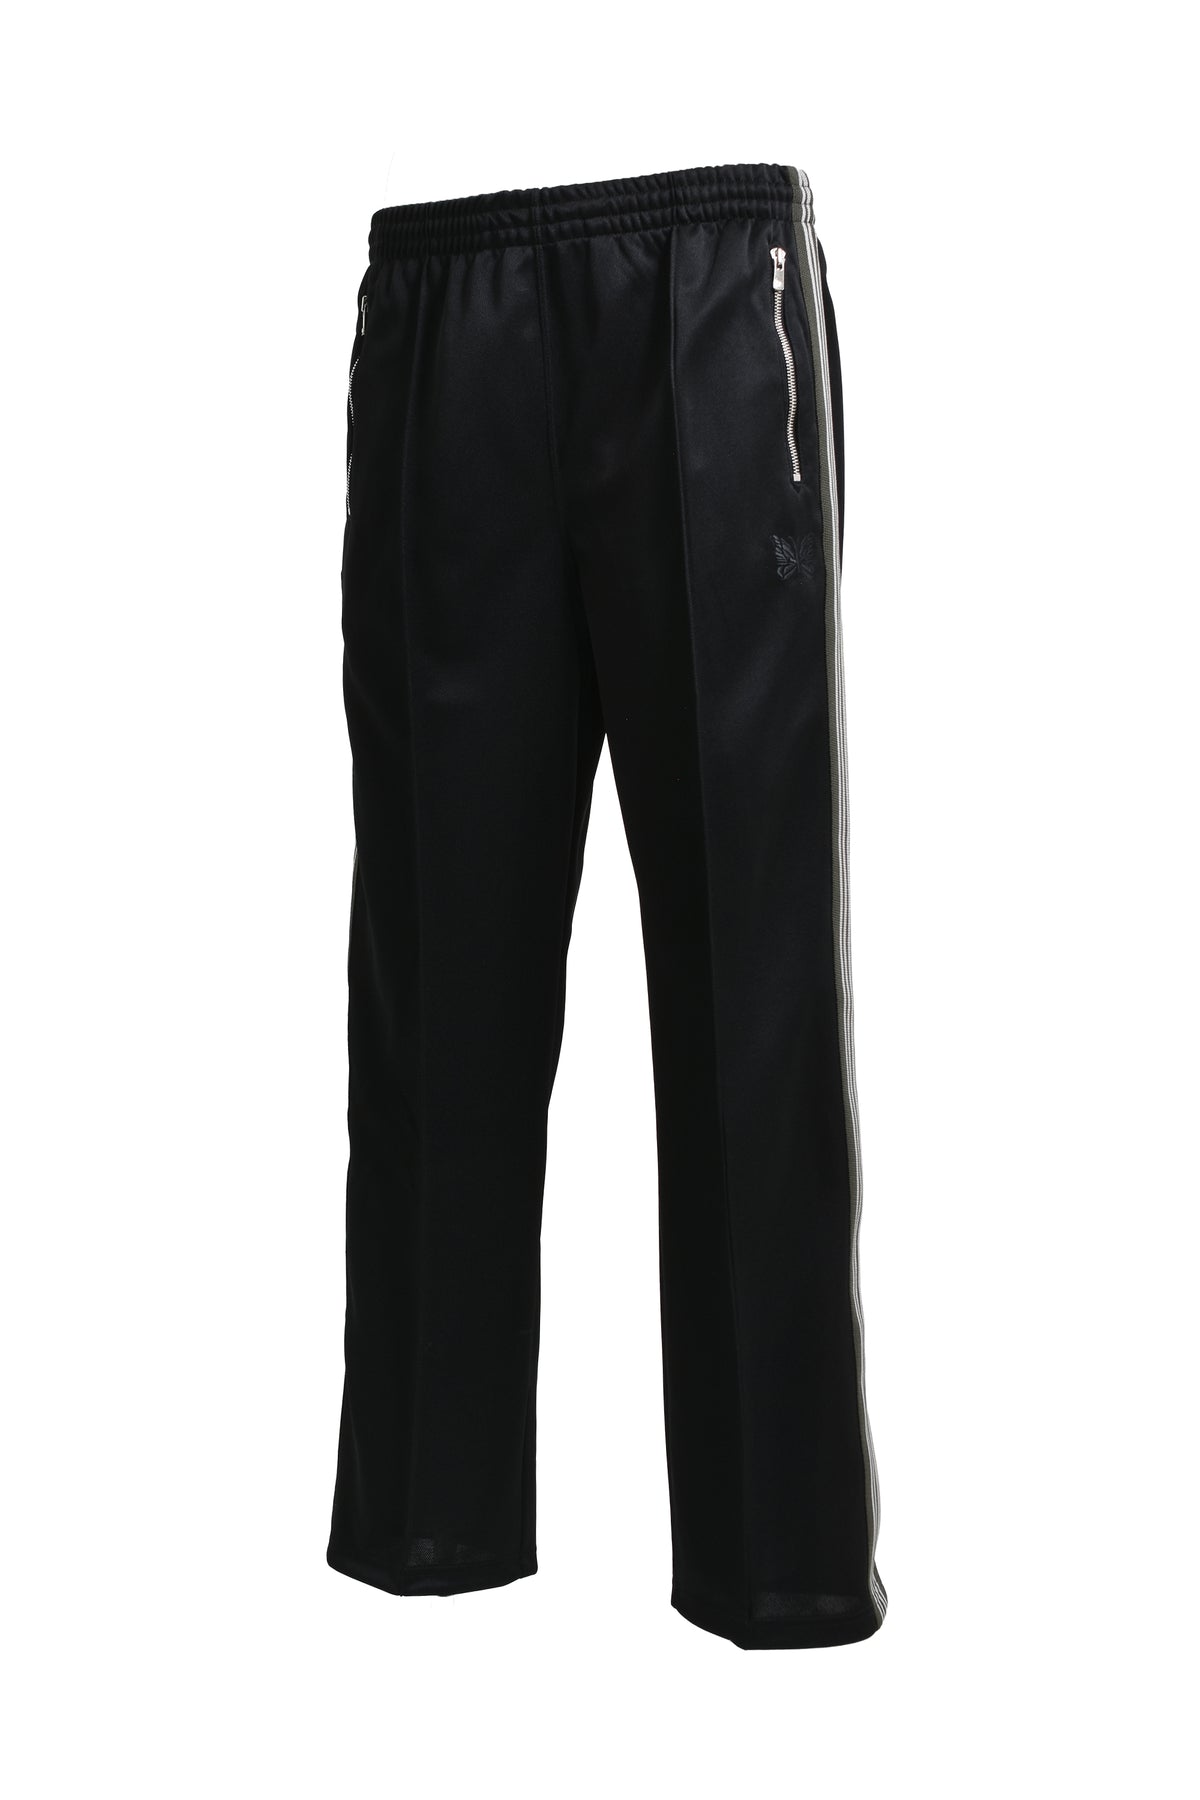 TRACK PANT - POLY SMOOTH (EXCLUSIVE) / BLK CHA BEI